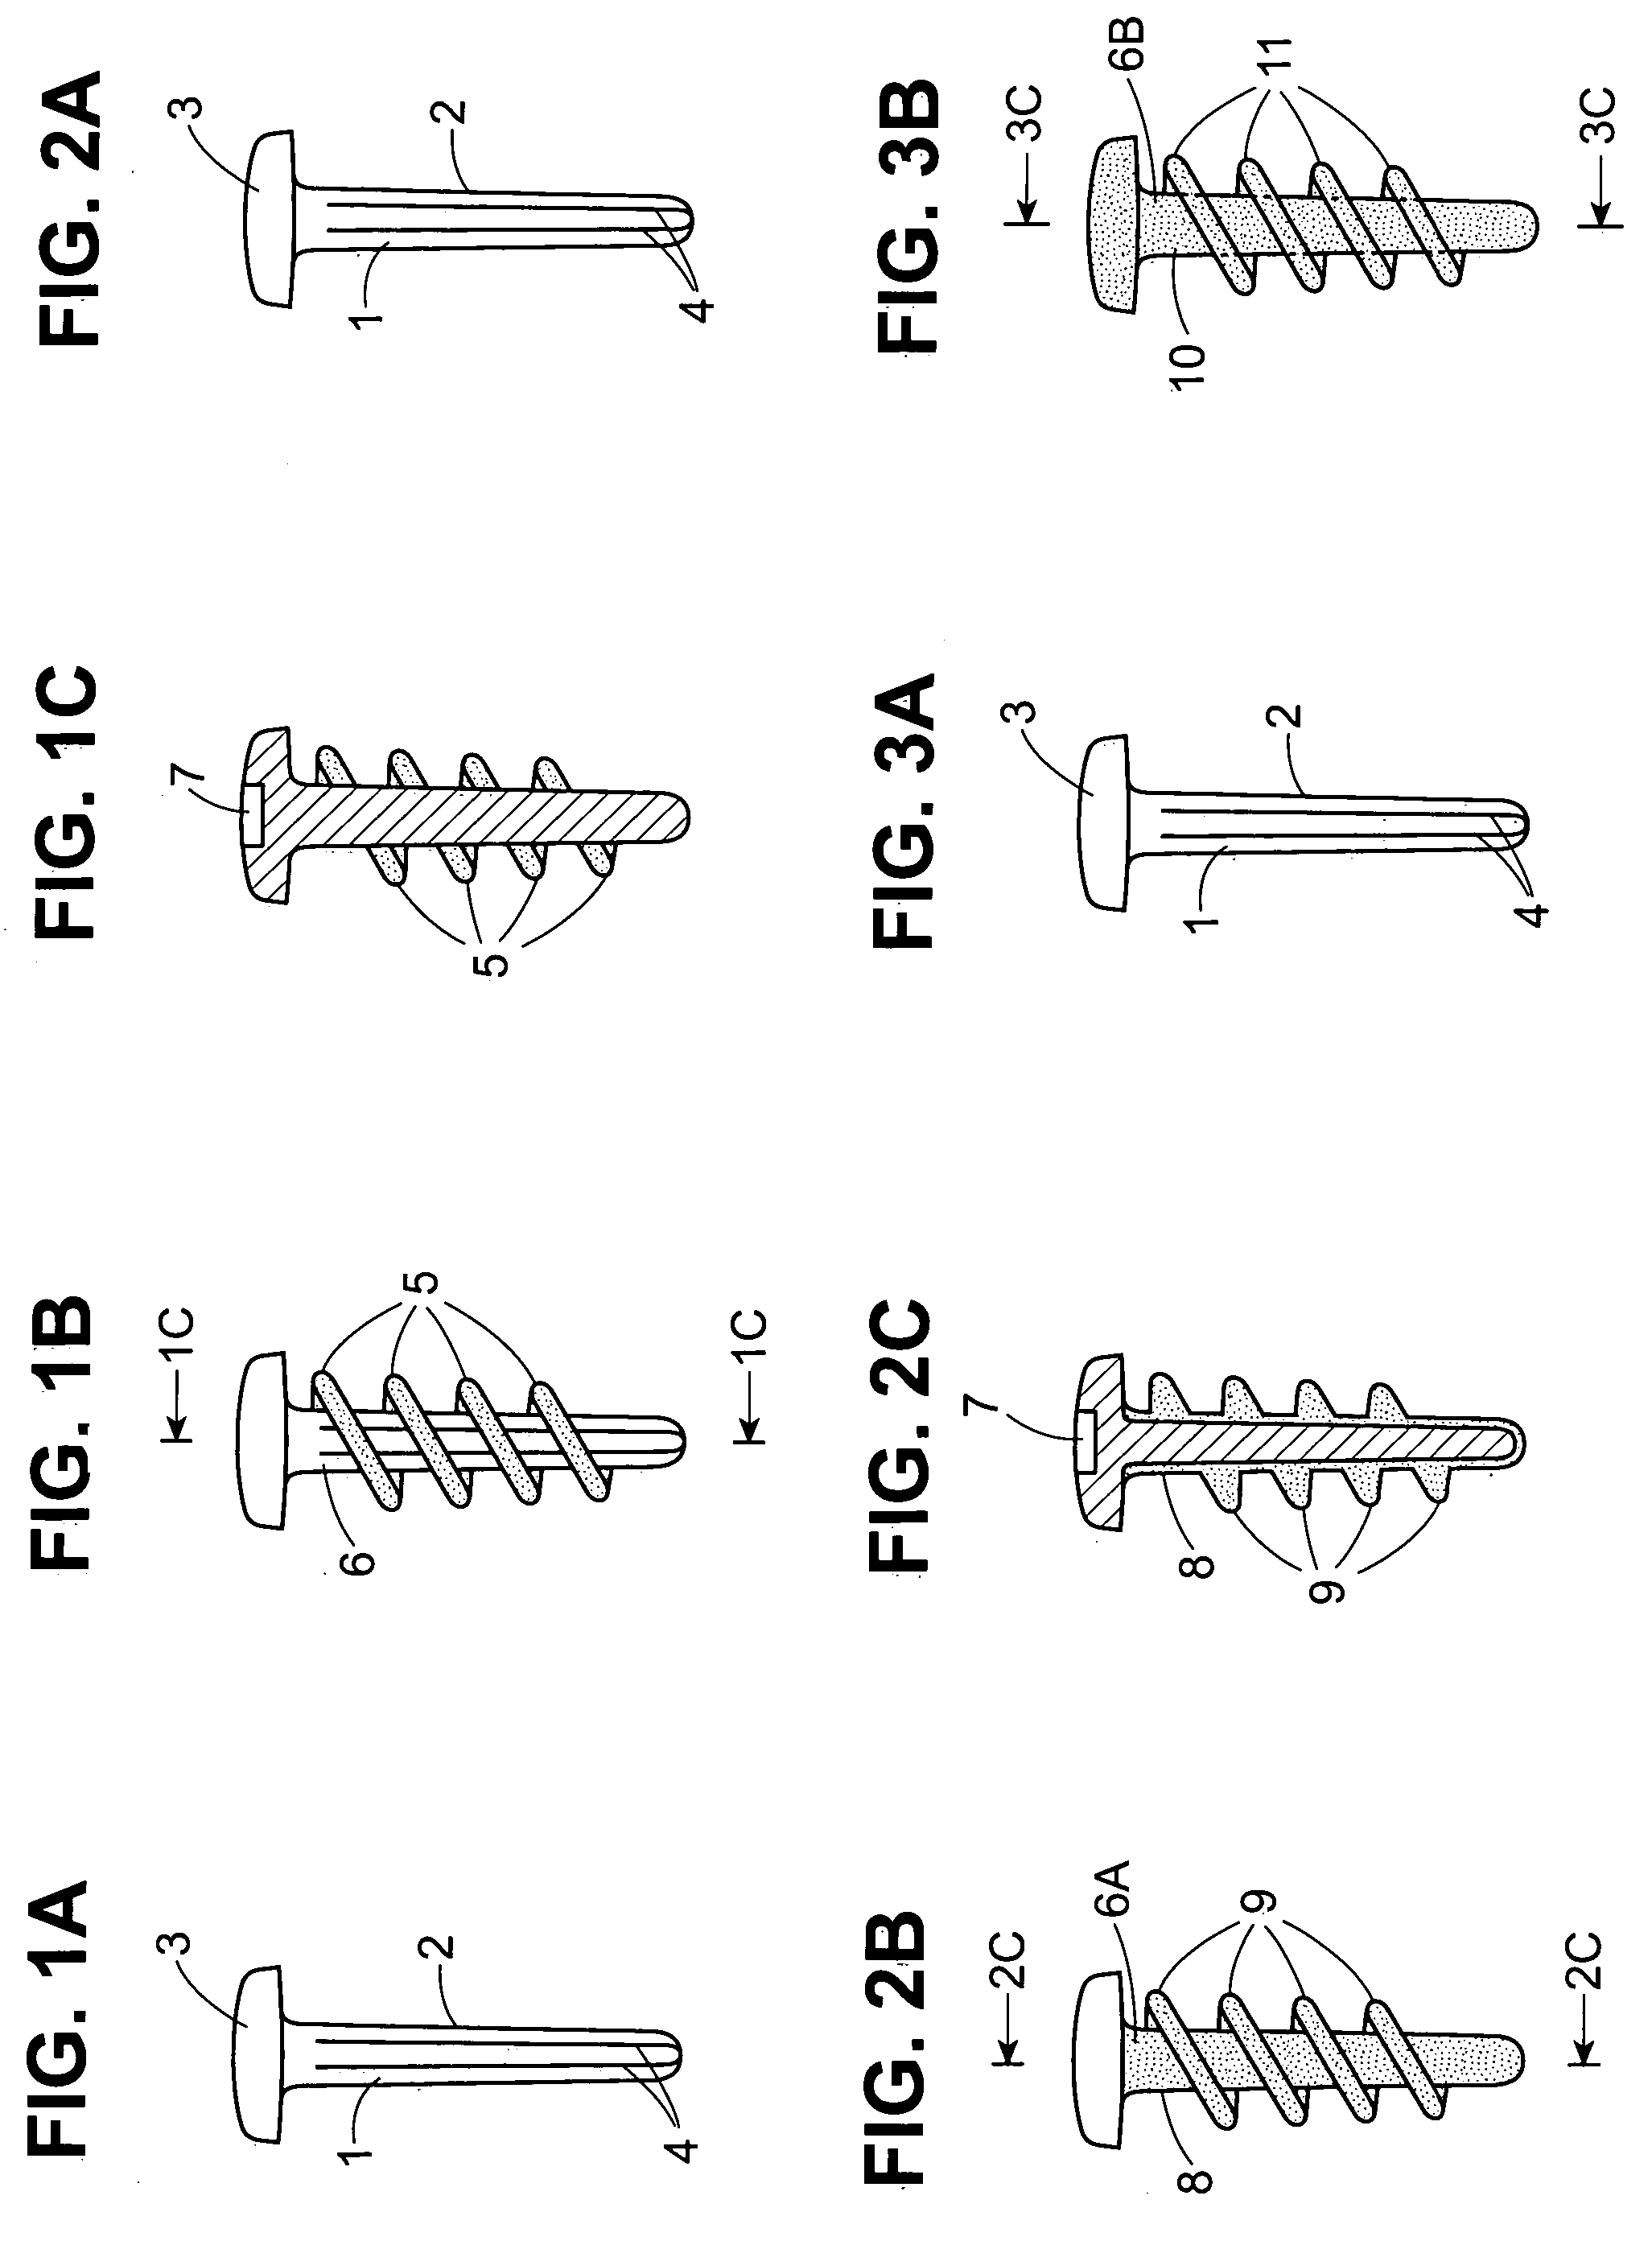 Surgical fasteners and related implant devices having bioabsorbable components